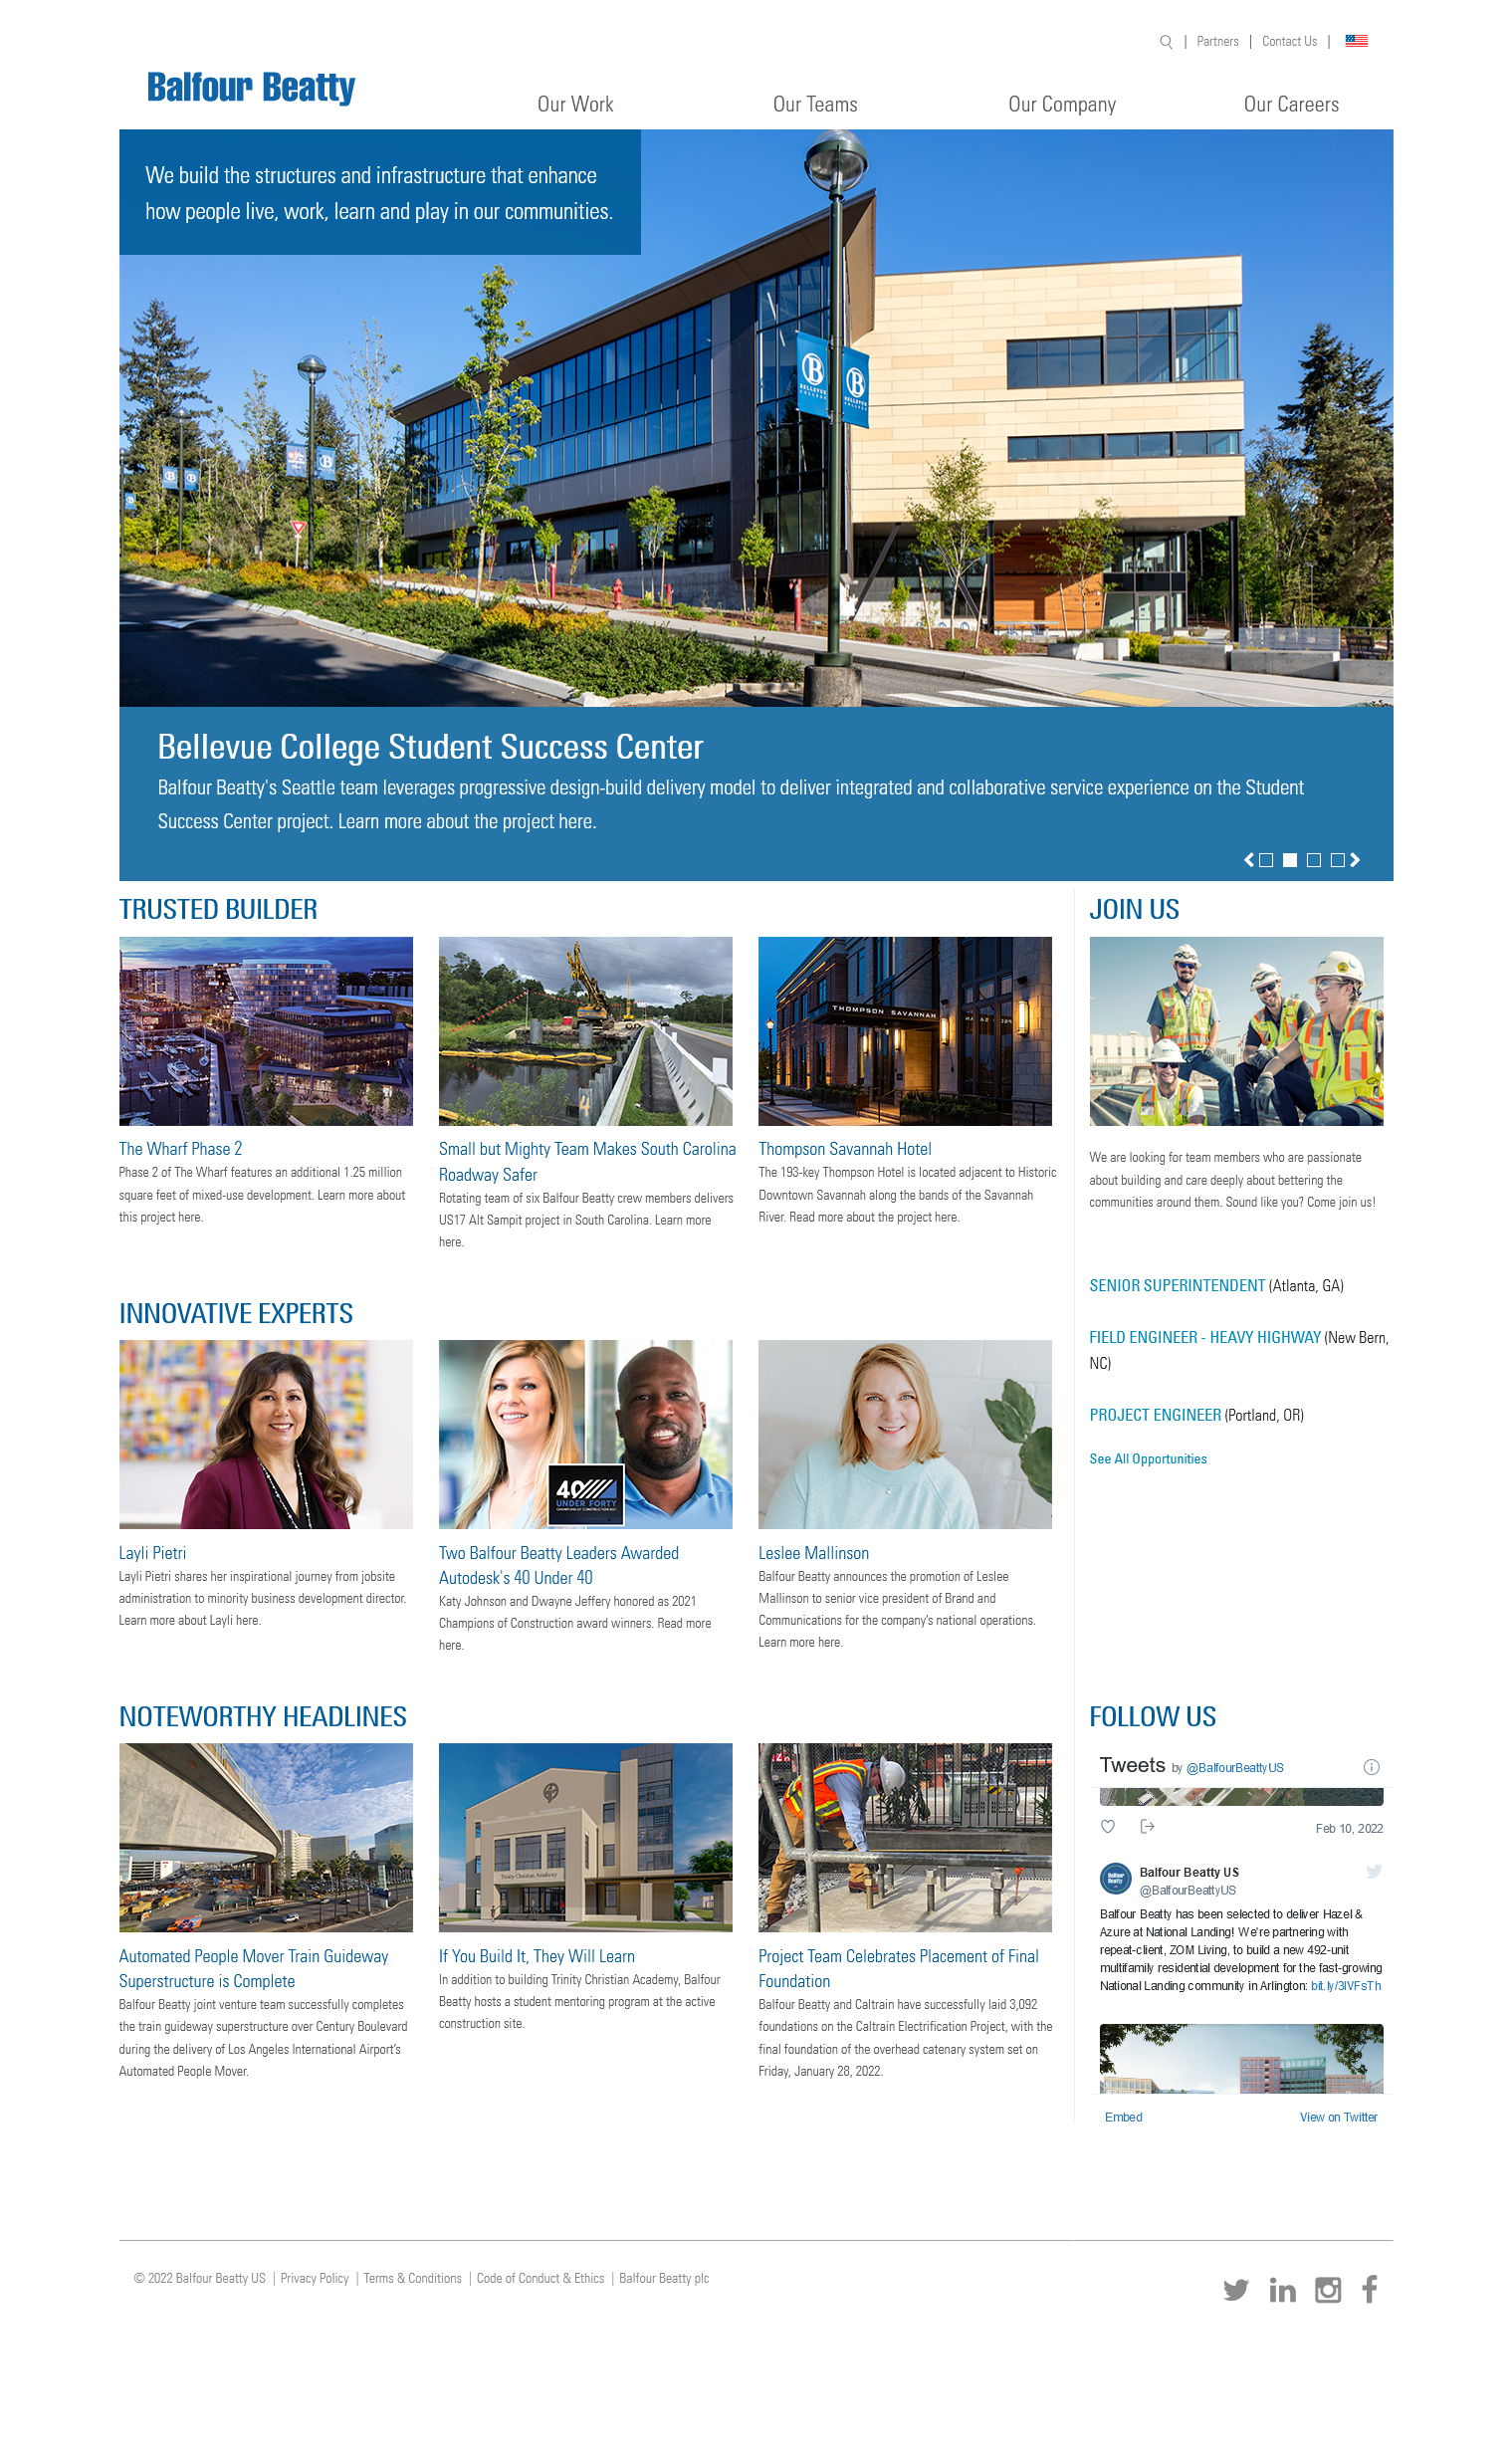 Image of the large construction website for Balfour Beatty.